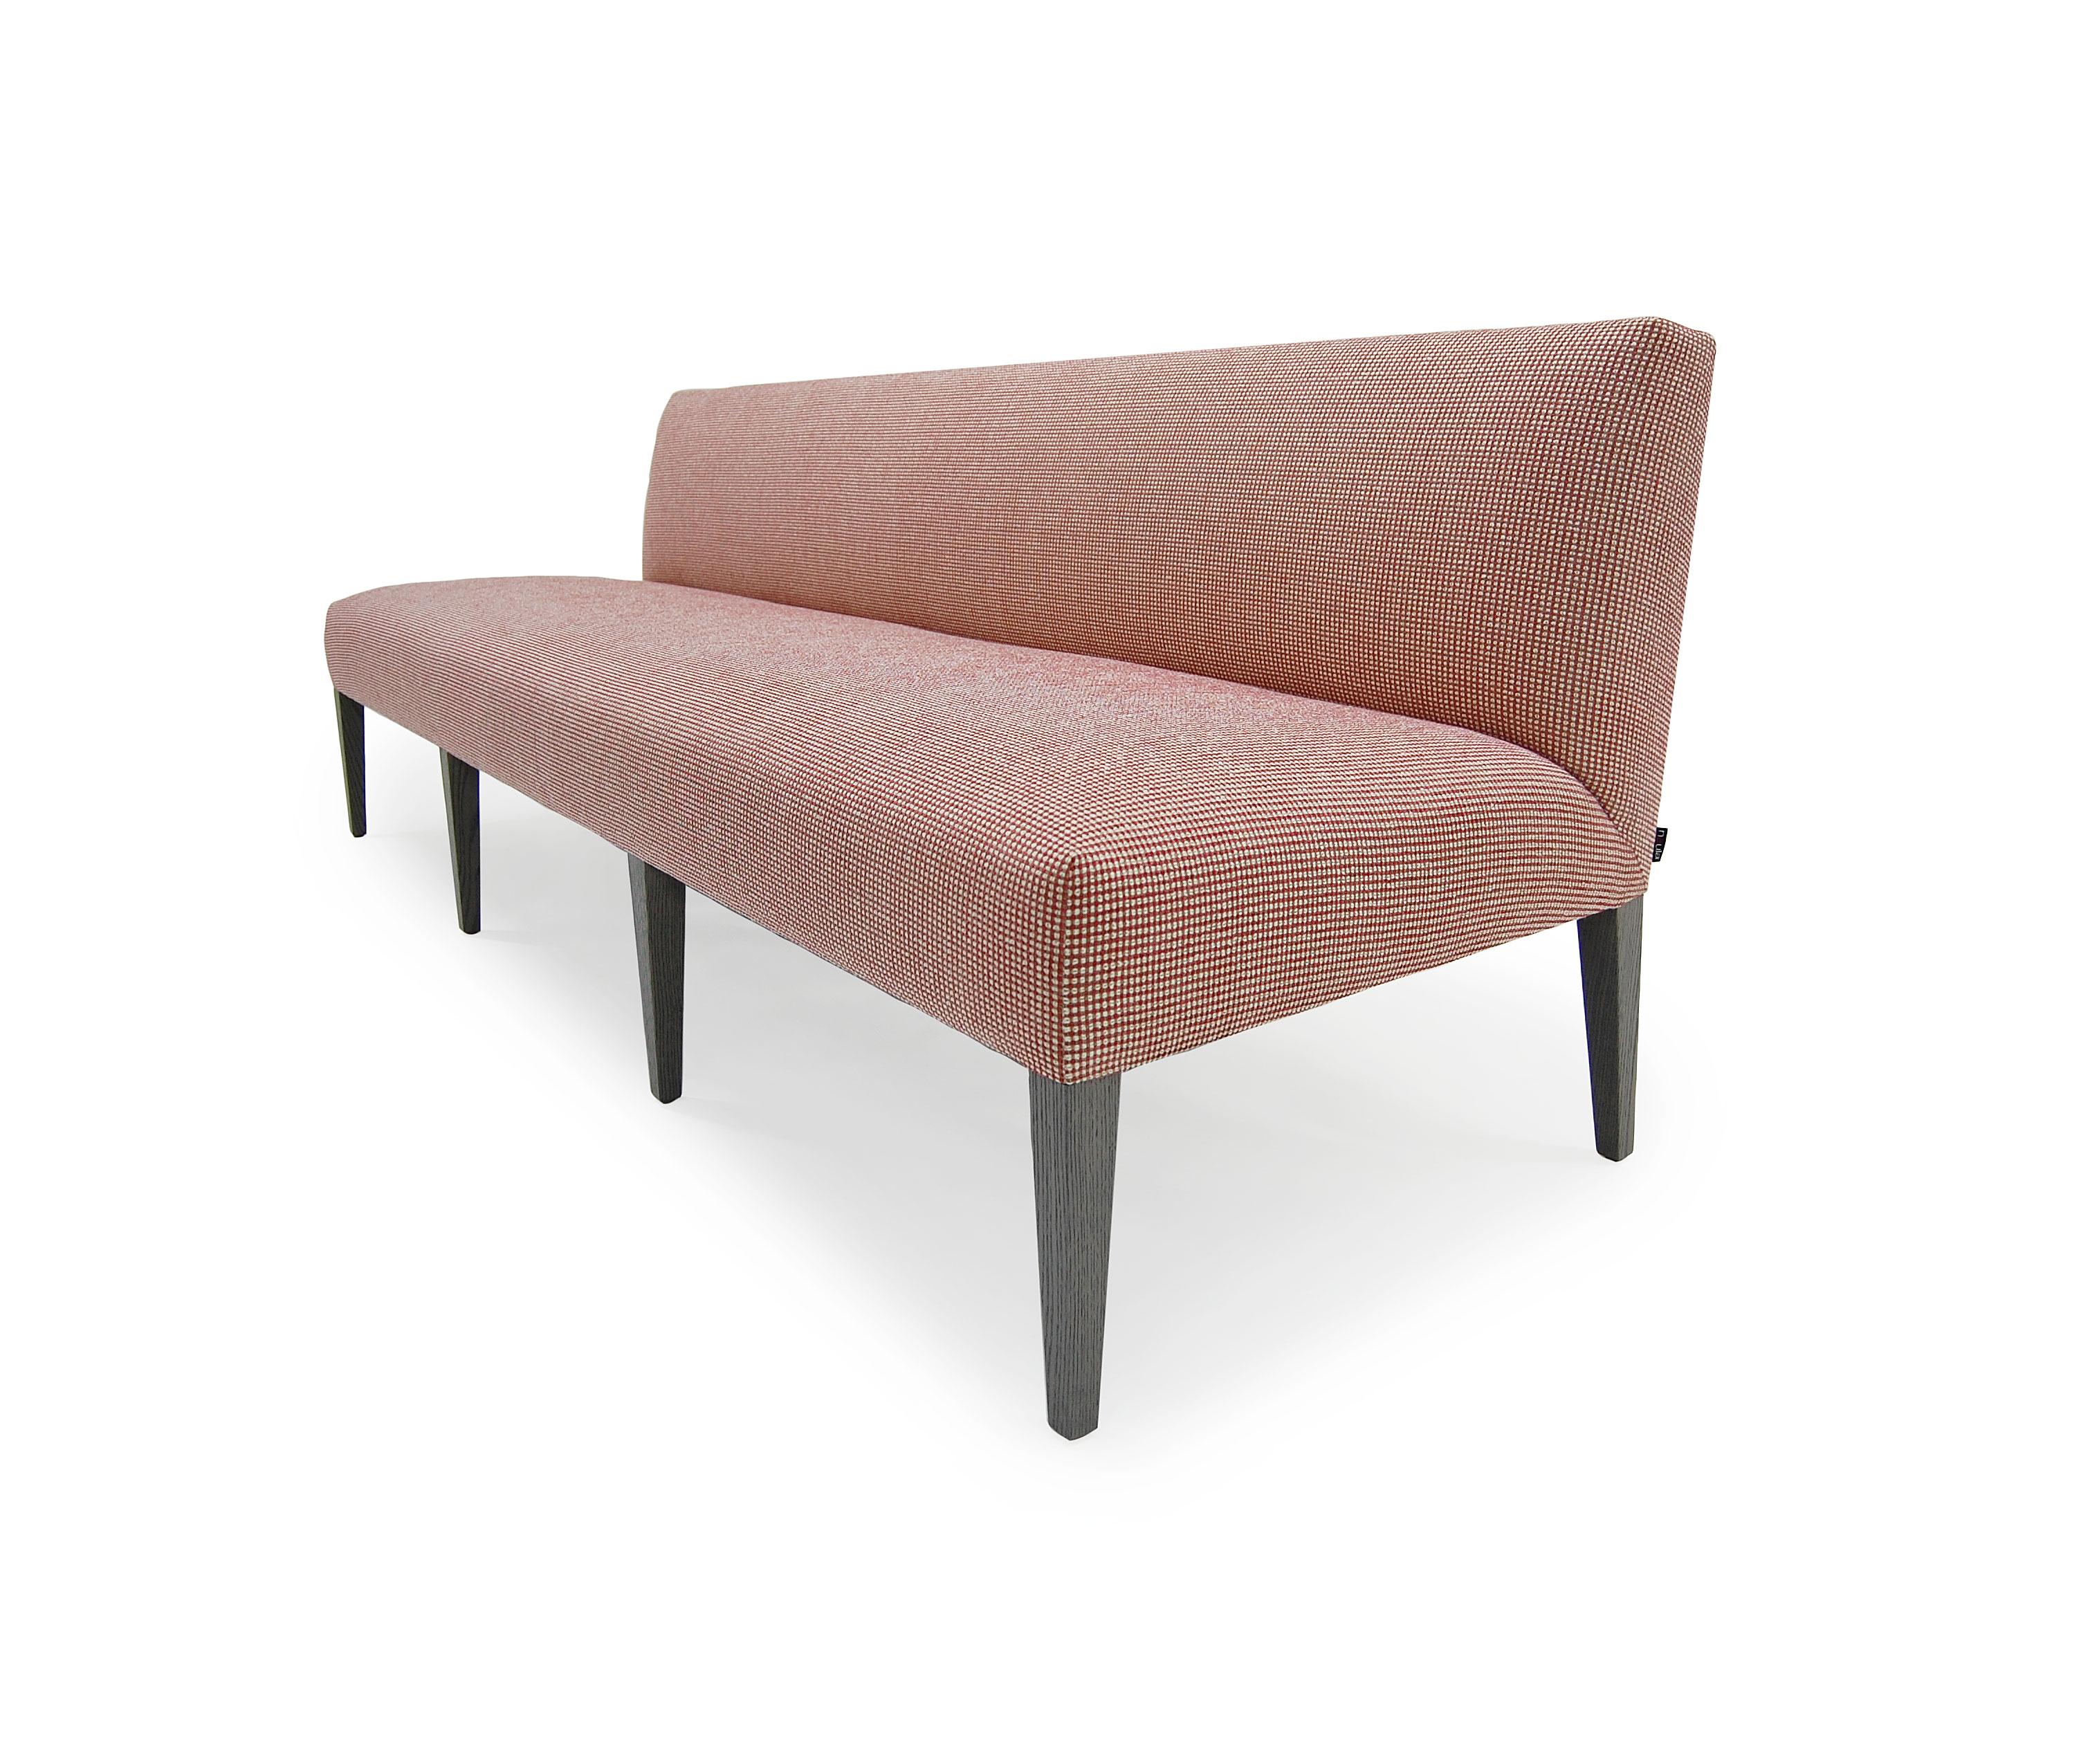 The sleek Morgan Banquette is cozy and charming. It is accented by tapered legs and strikes the perfect balance of utility and sophistication.